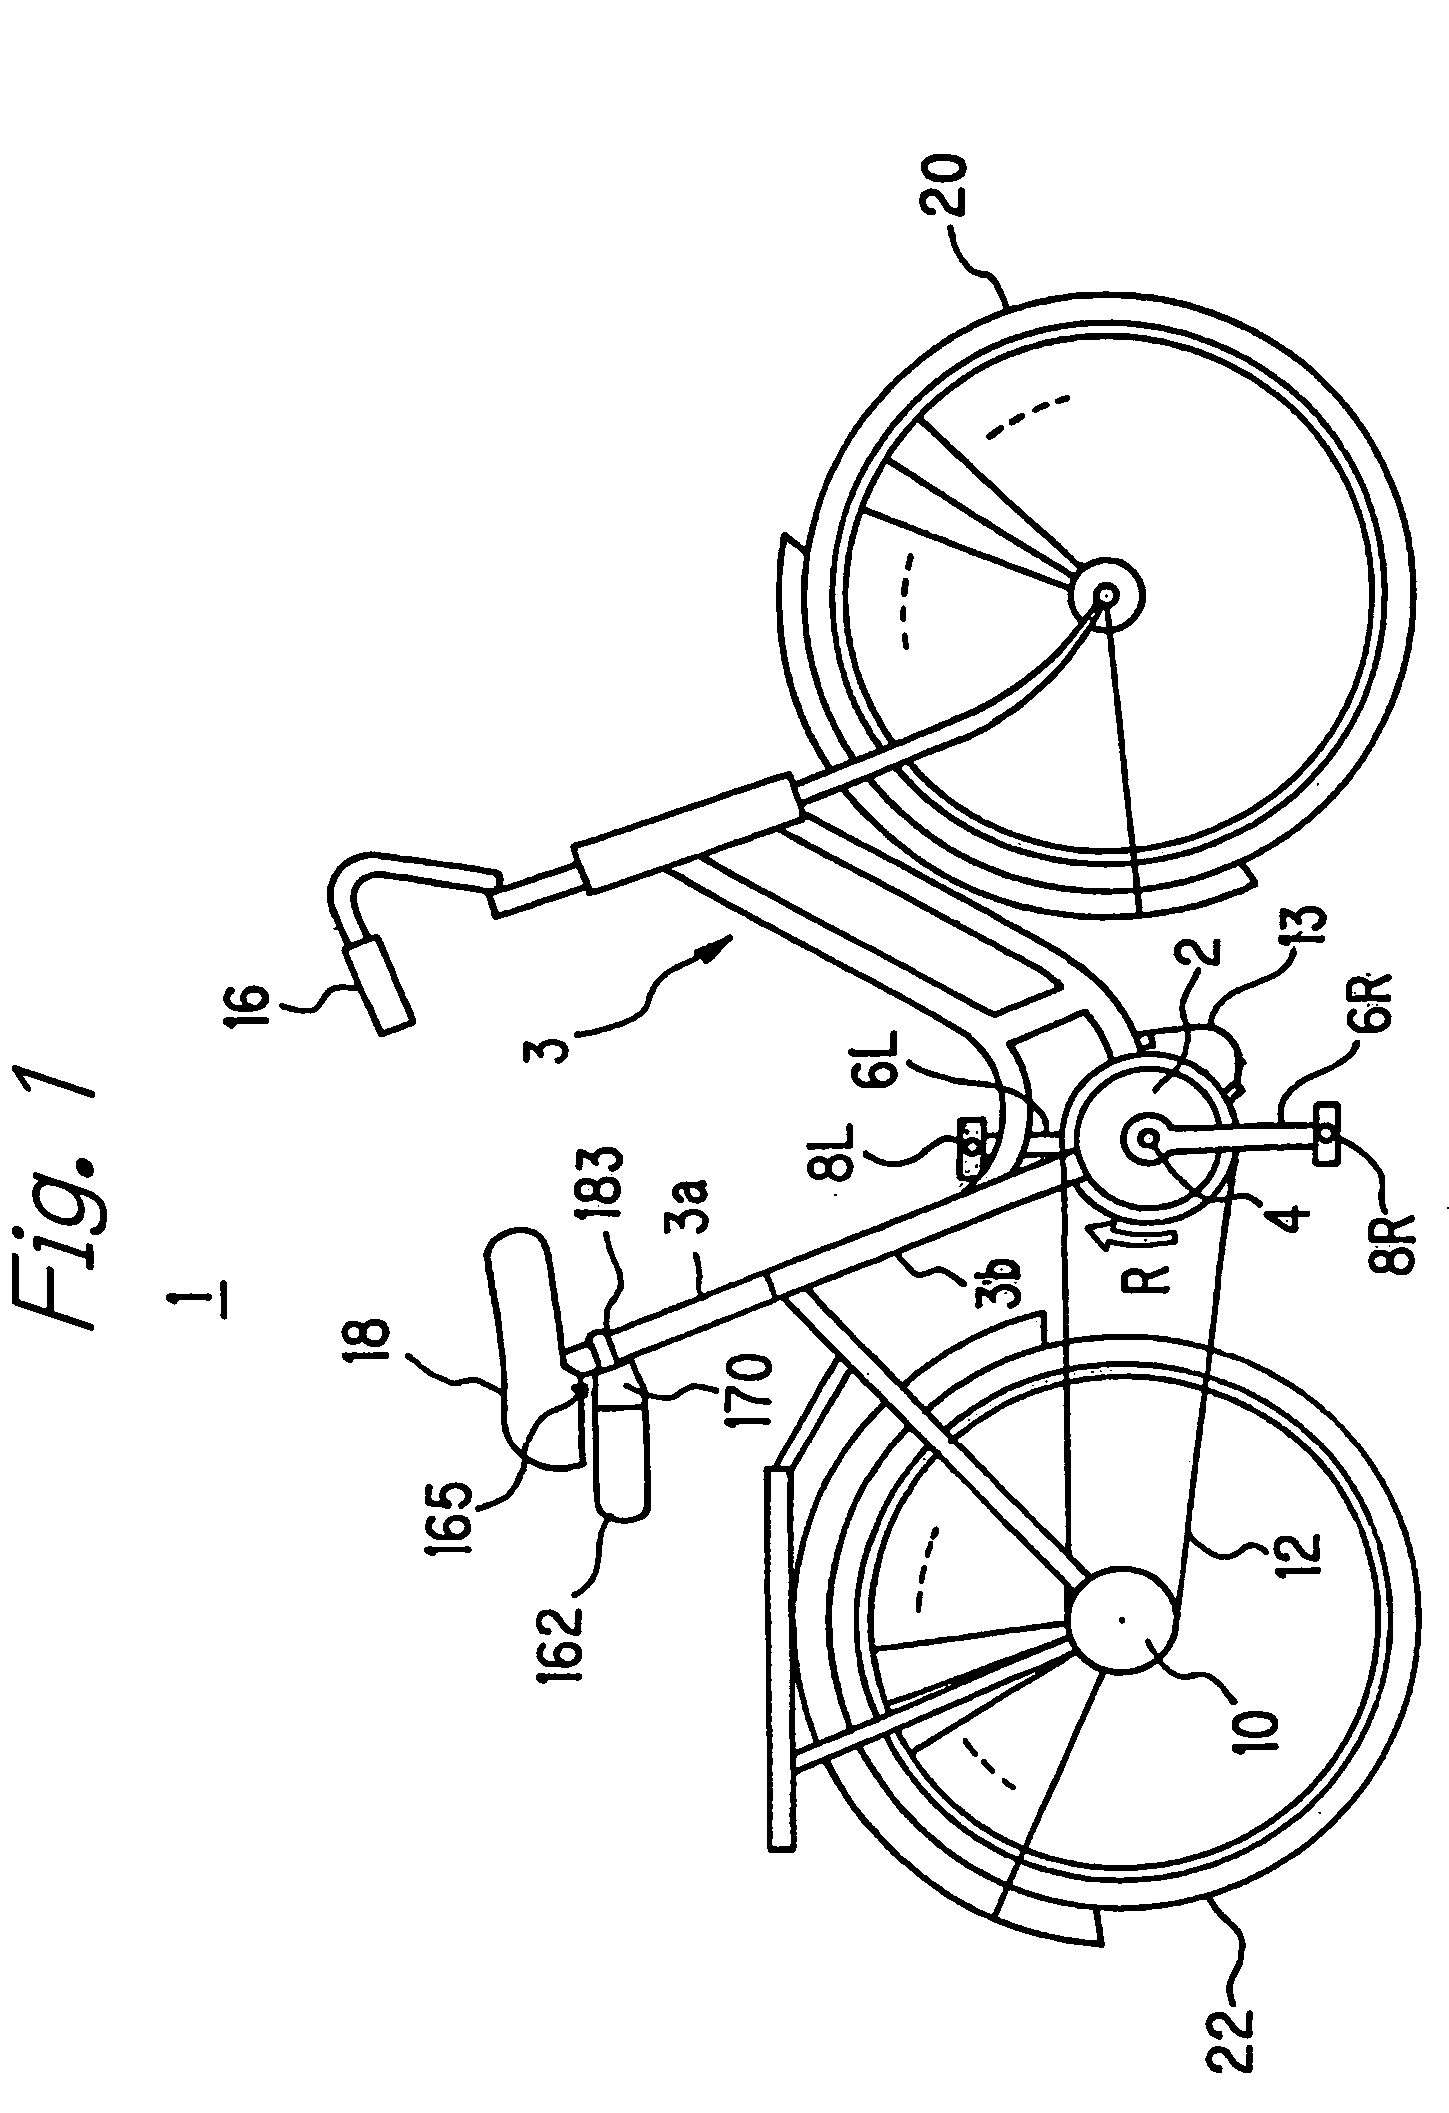 Electromotive power assisted bicycle